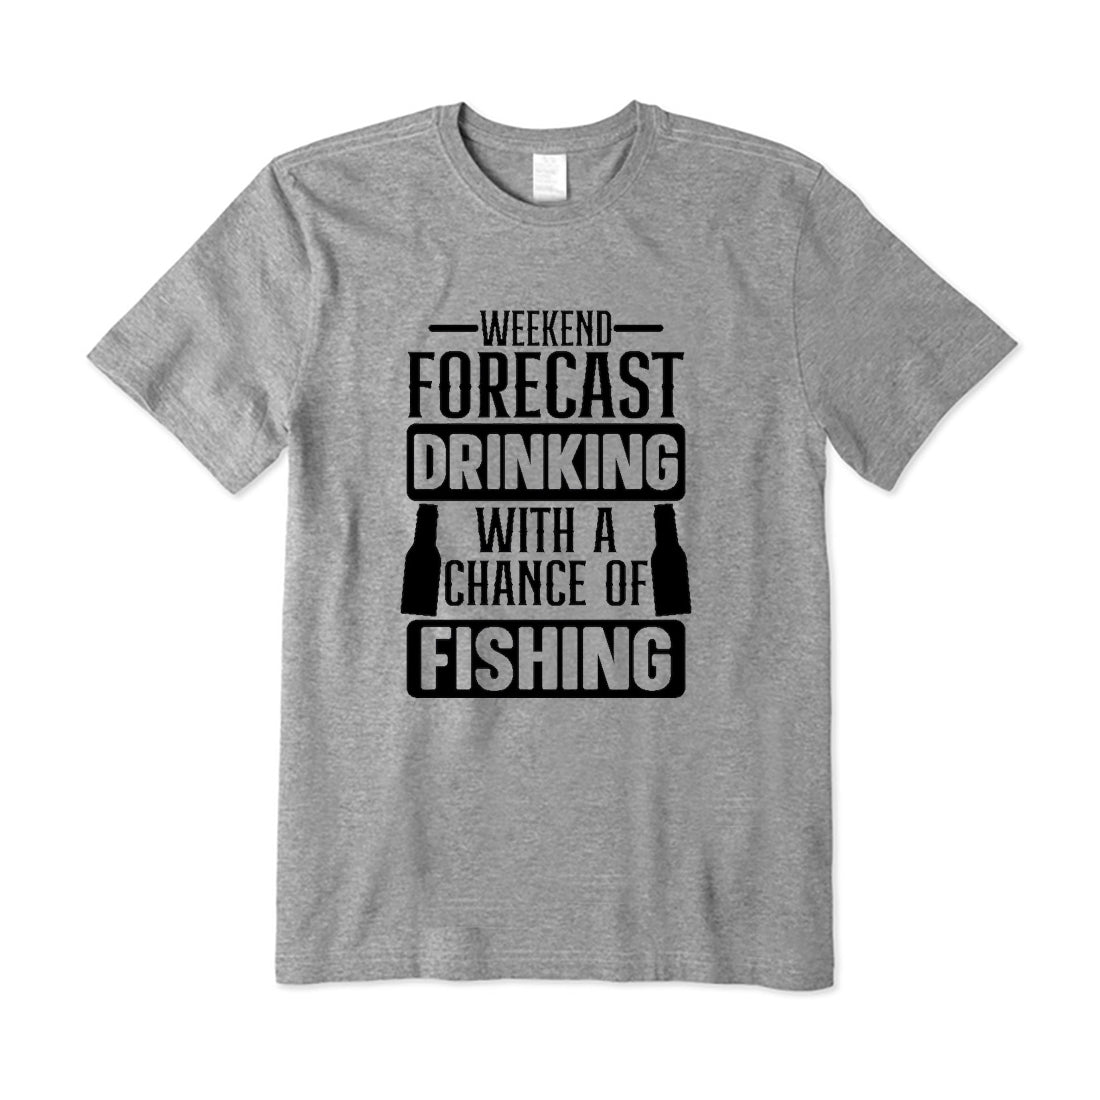 Weekend Forecast Drinking With A Chance Of Fishing T-Shirt